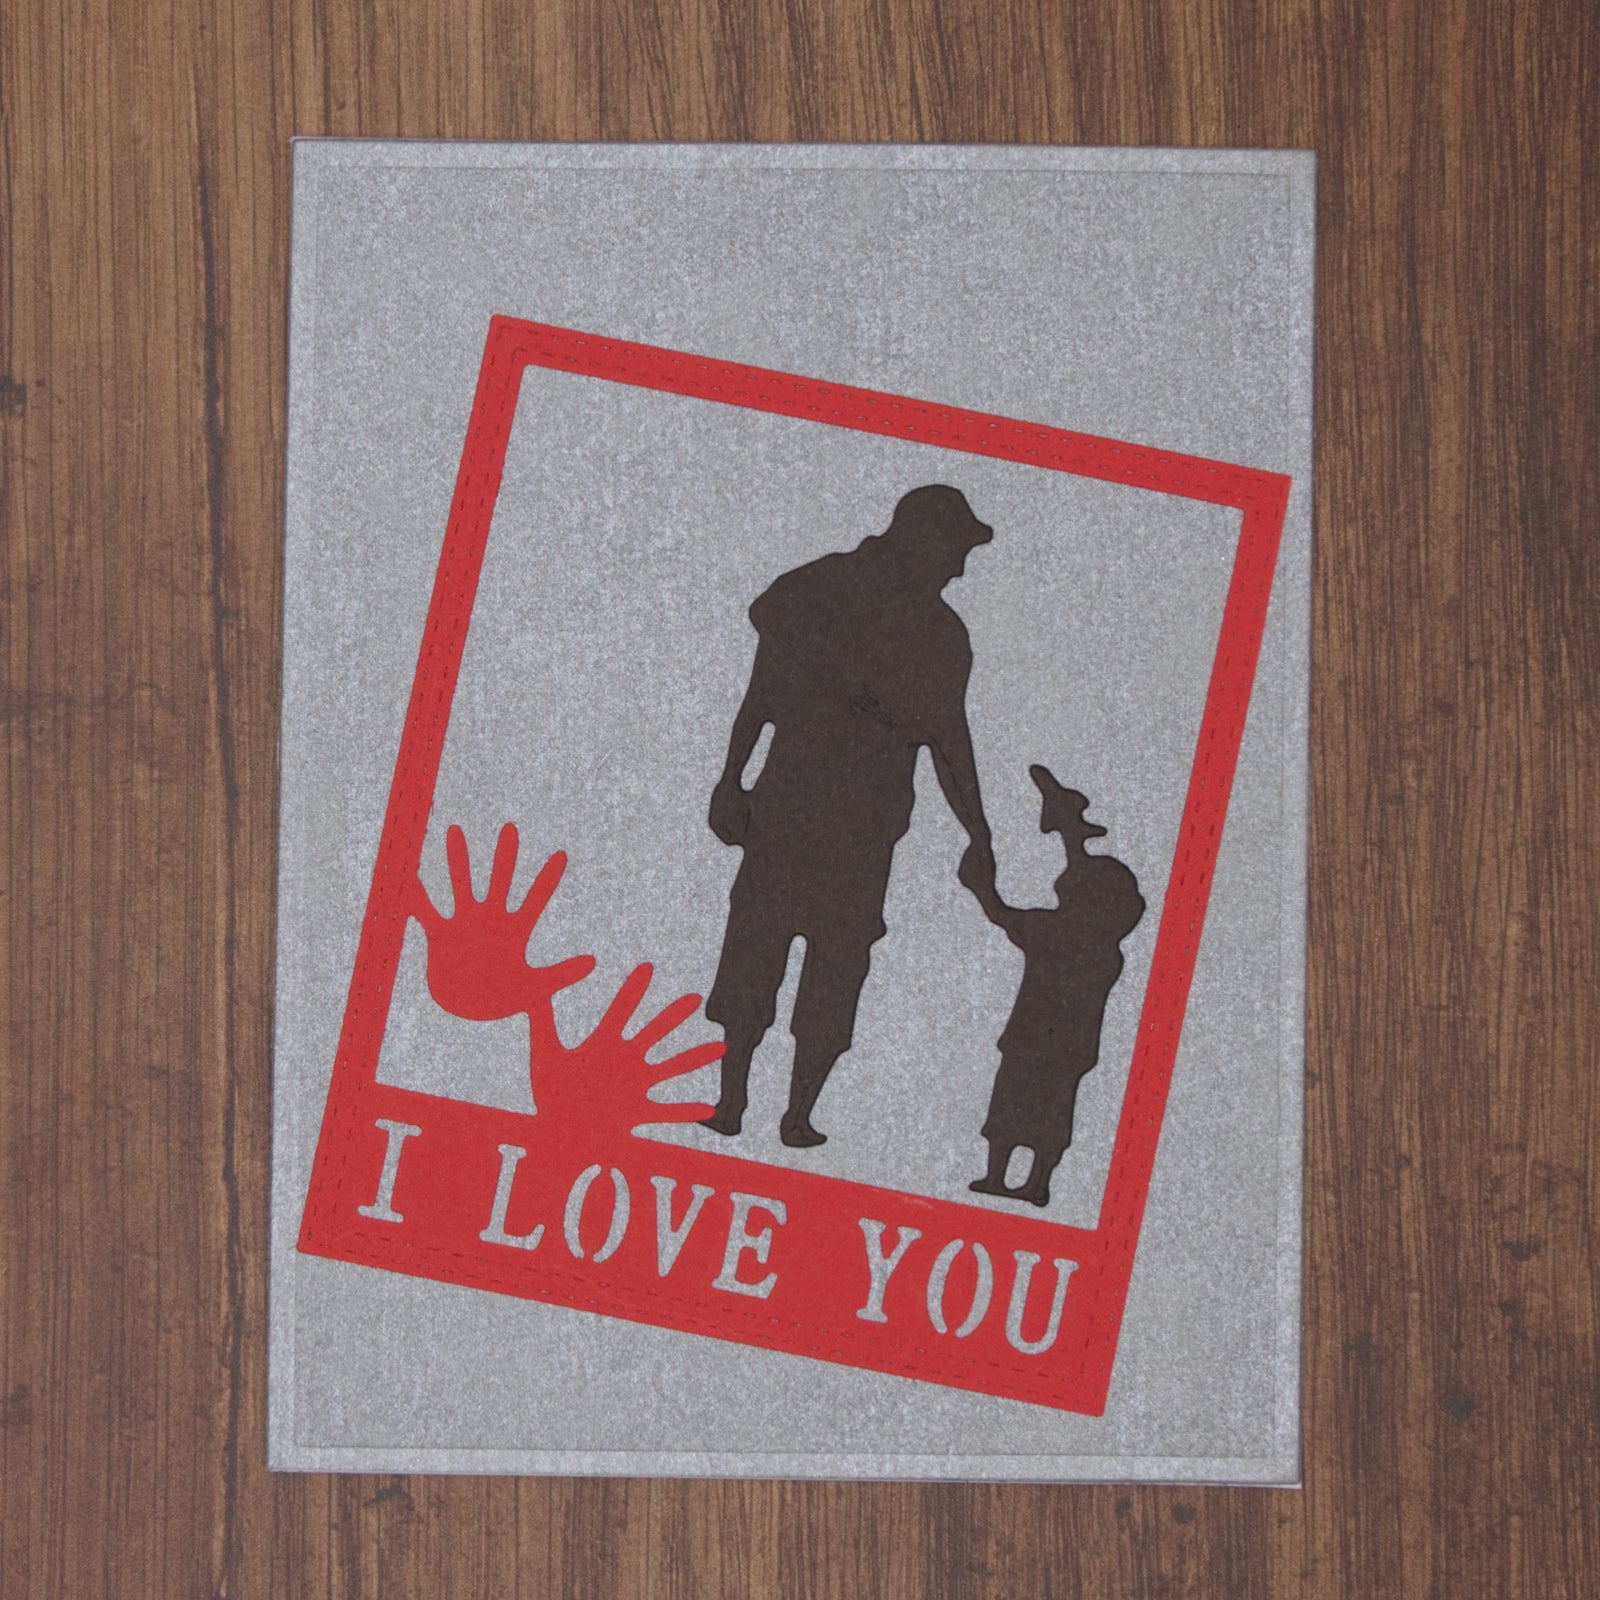 Dad & Son Holding Hands Silhouette Cutting Die